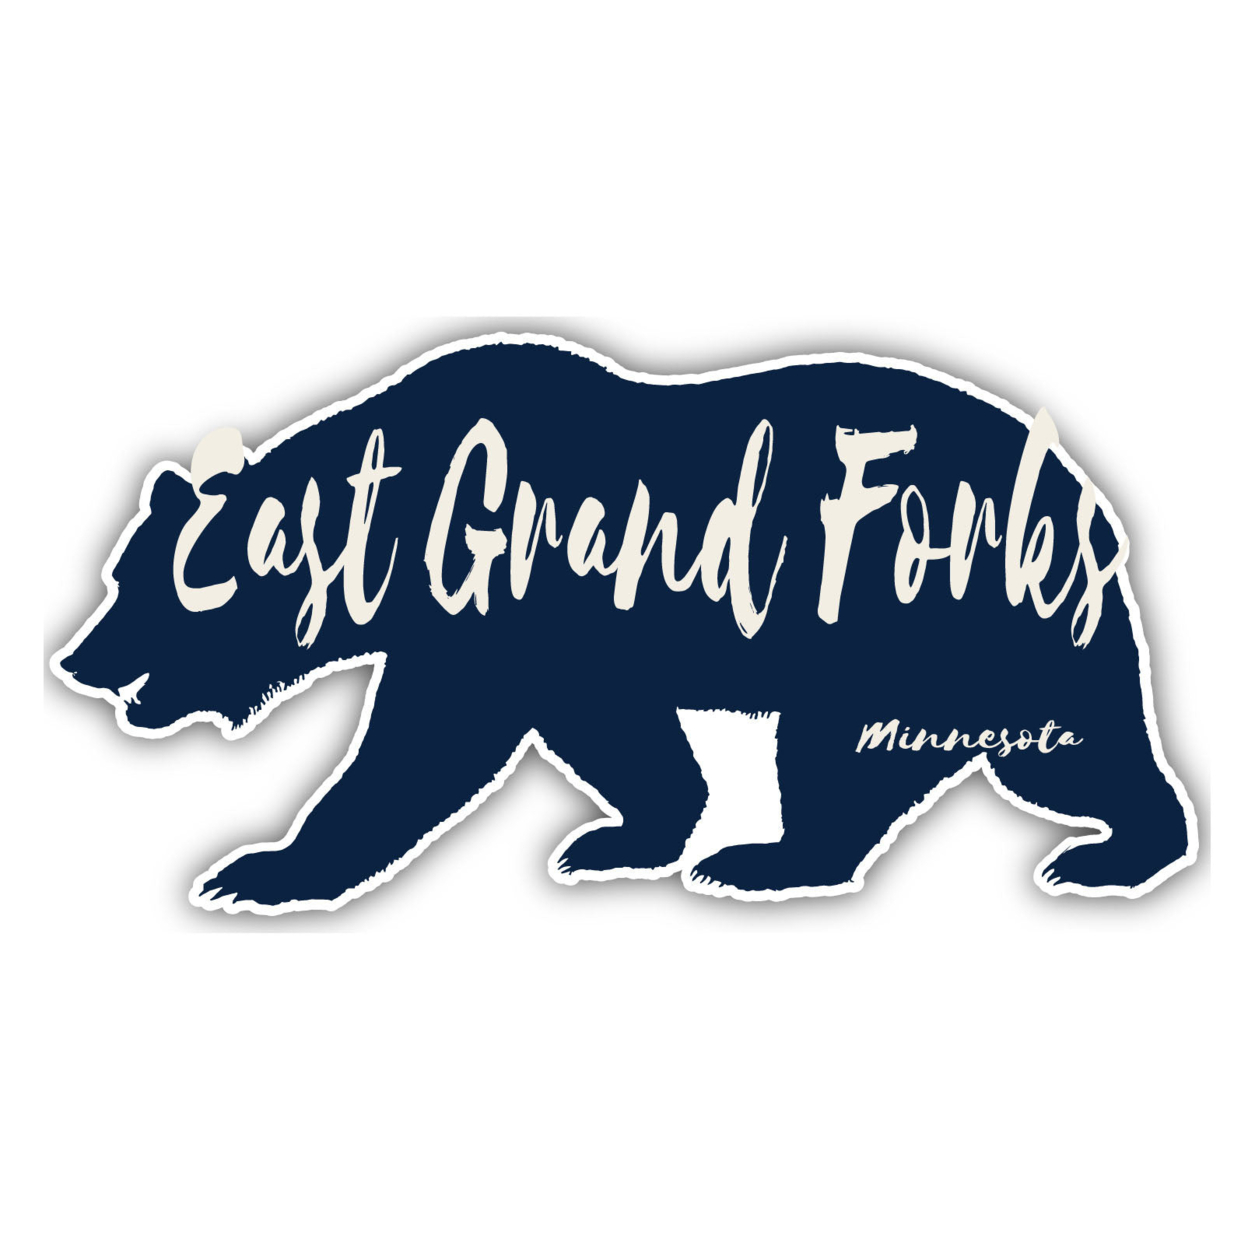 East Grand Forks Minnesota Souvenir Decorative Stickers (Choose Theme And Size) - Single Unit, 8-Inch, Tent